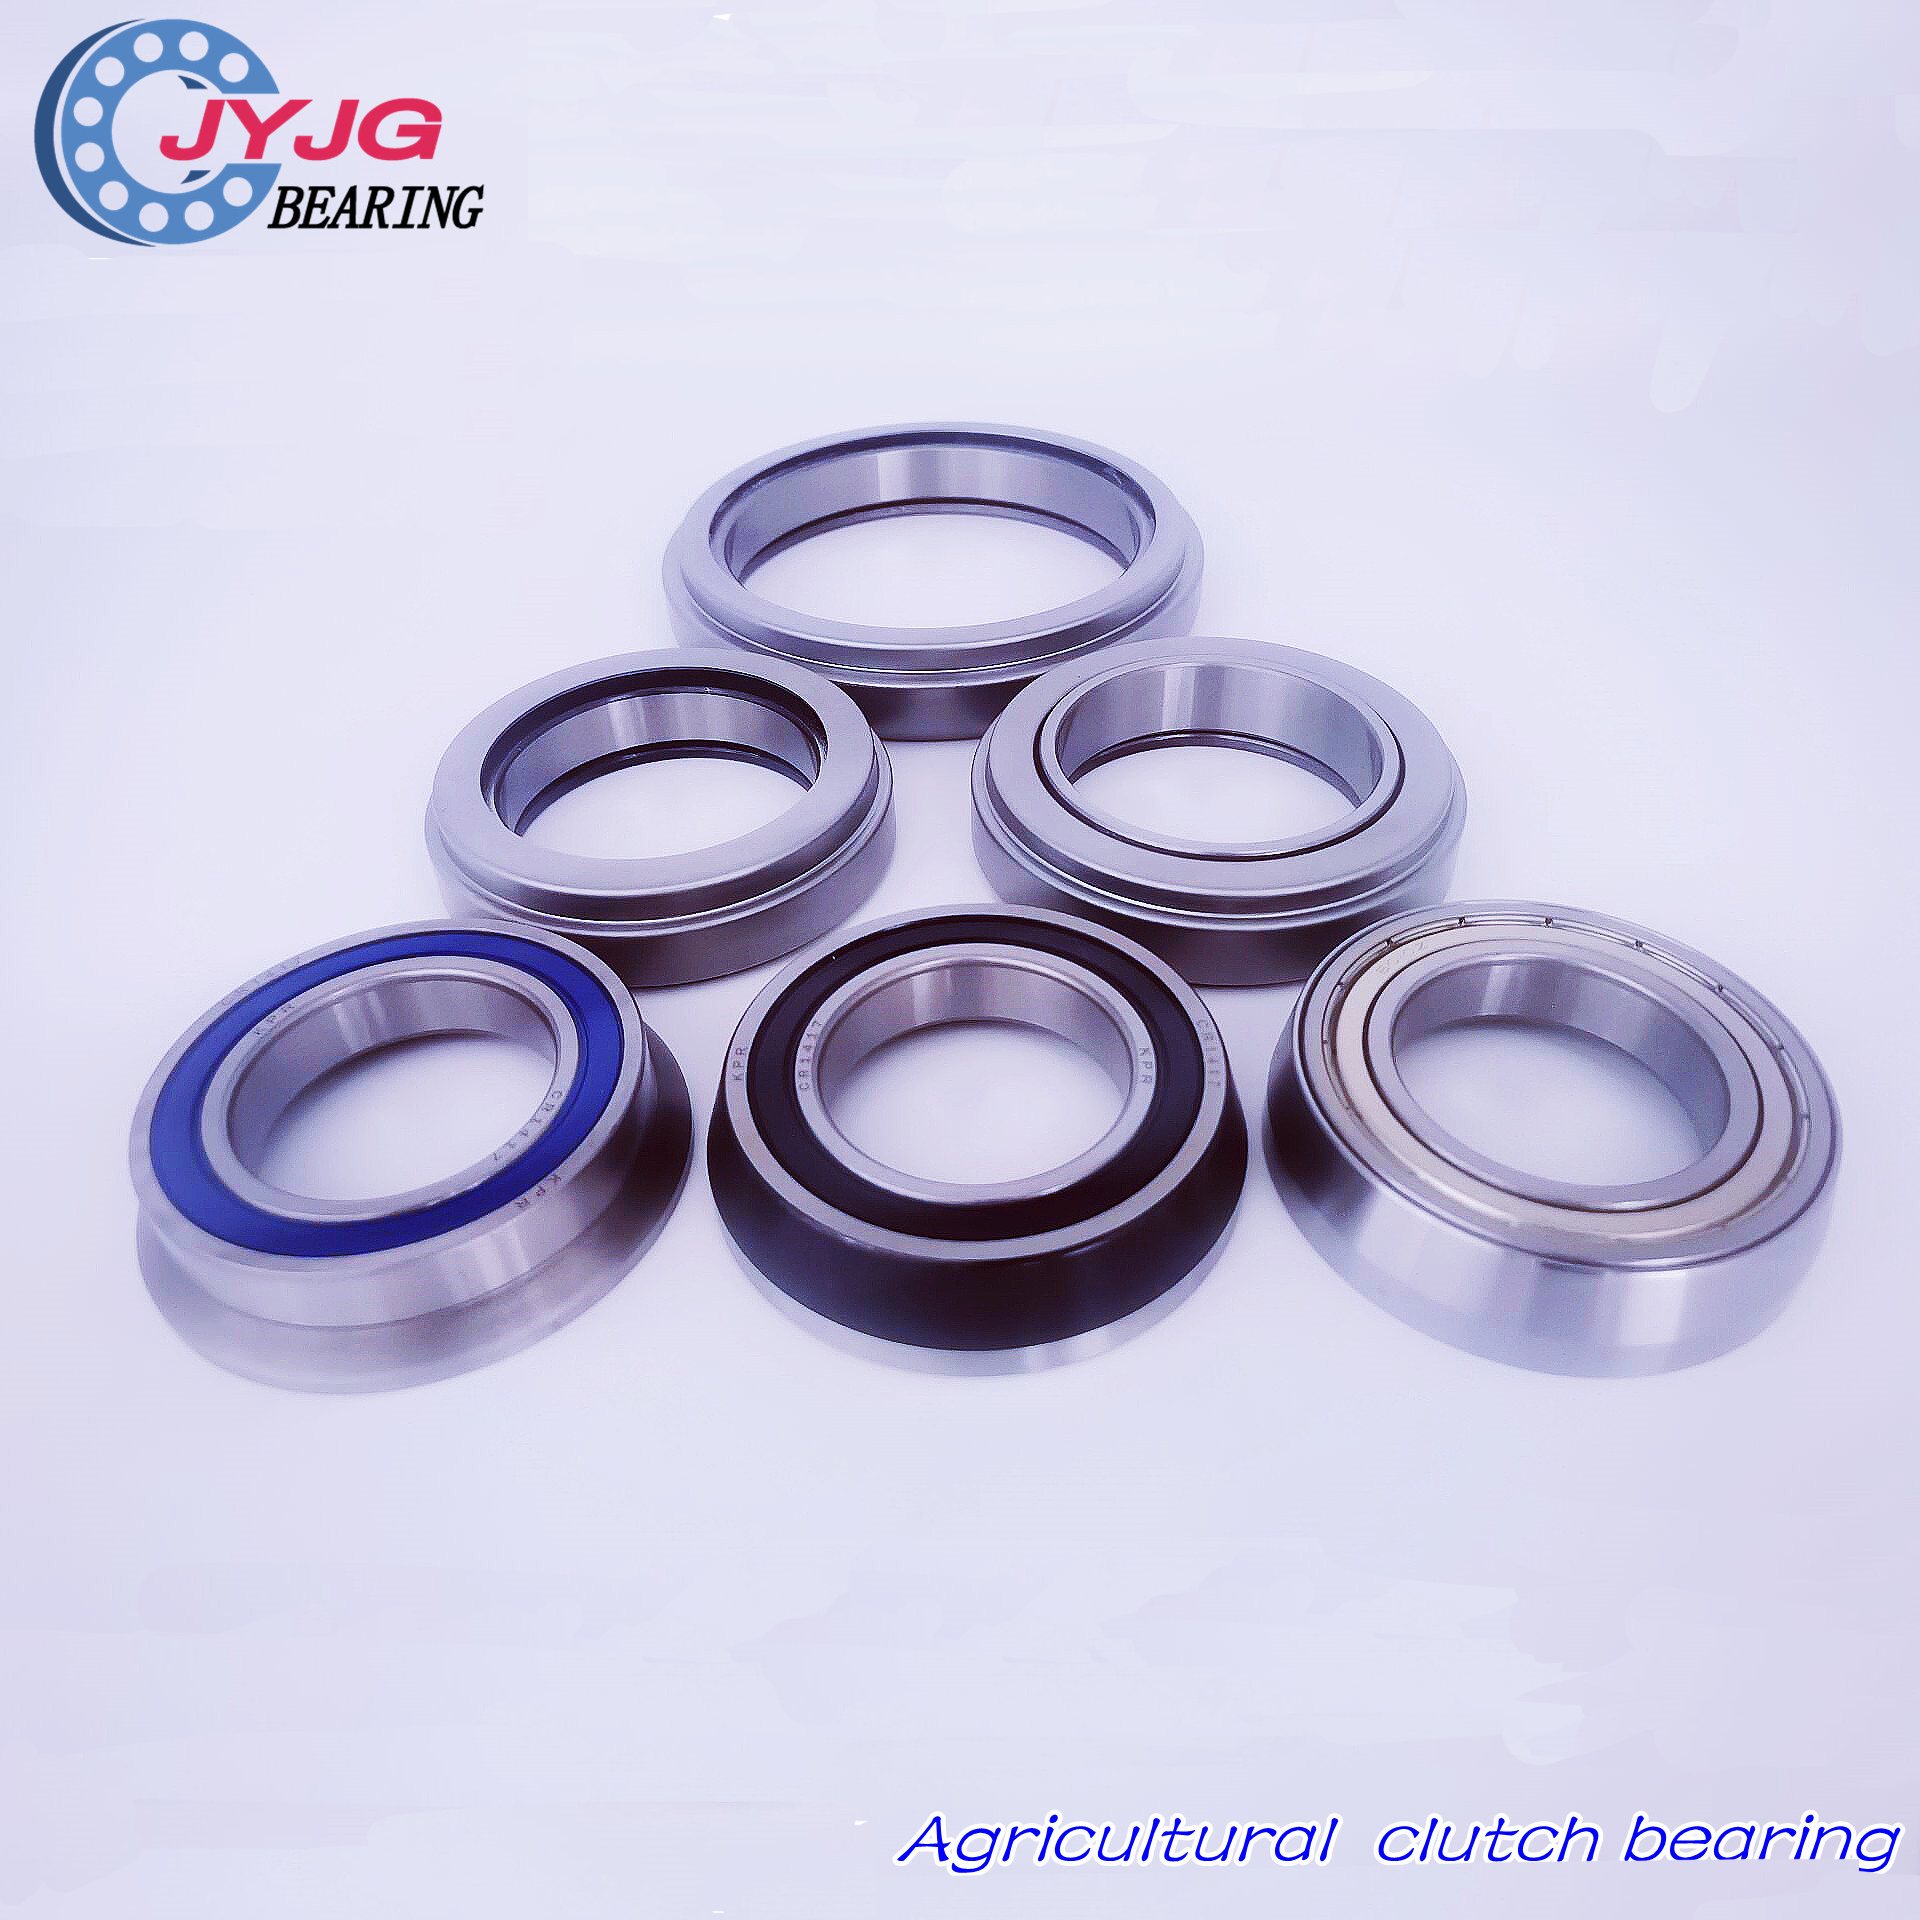 Agricultural clutch bearing